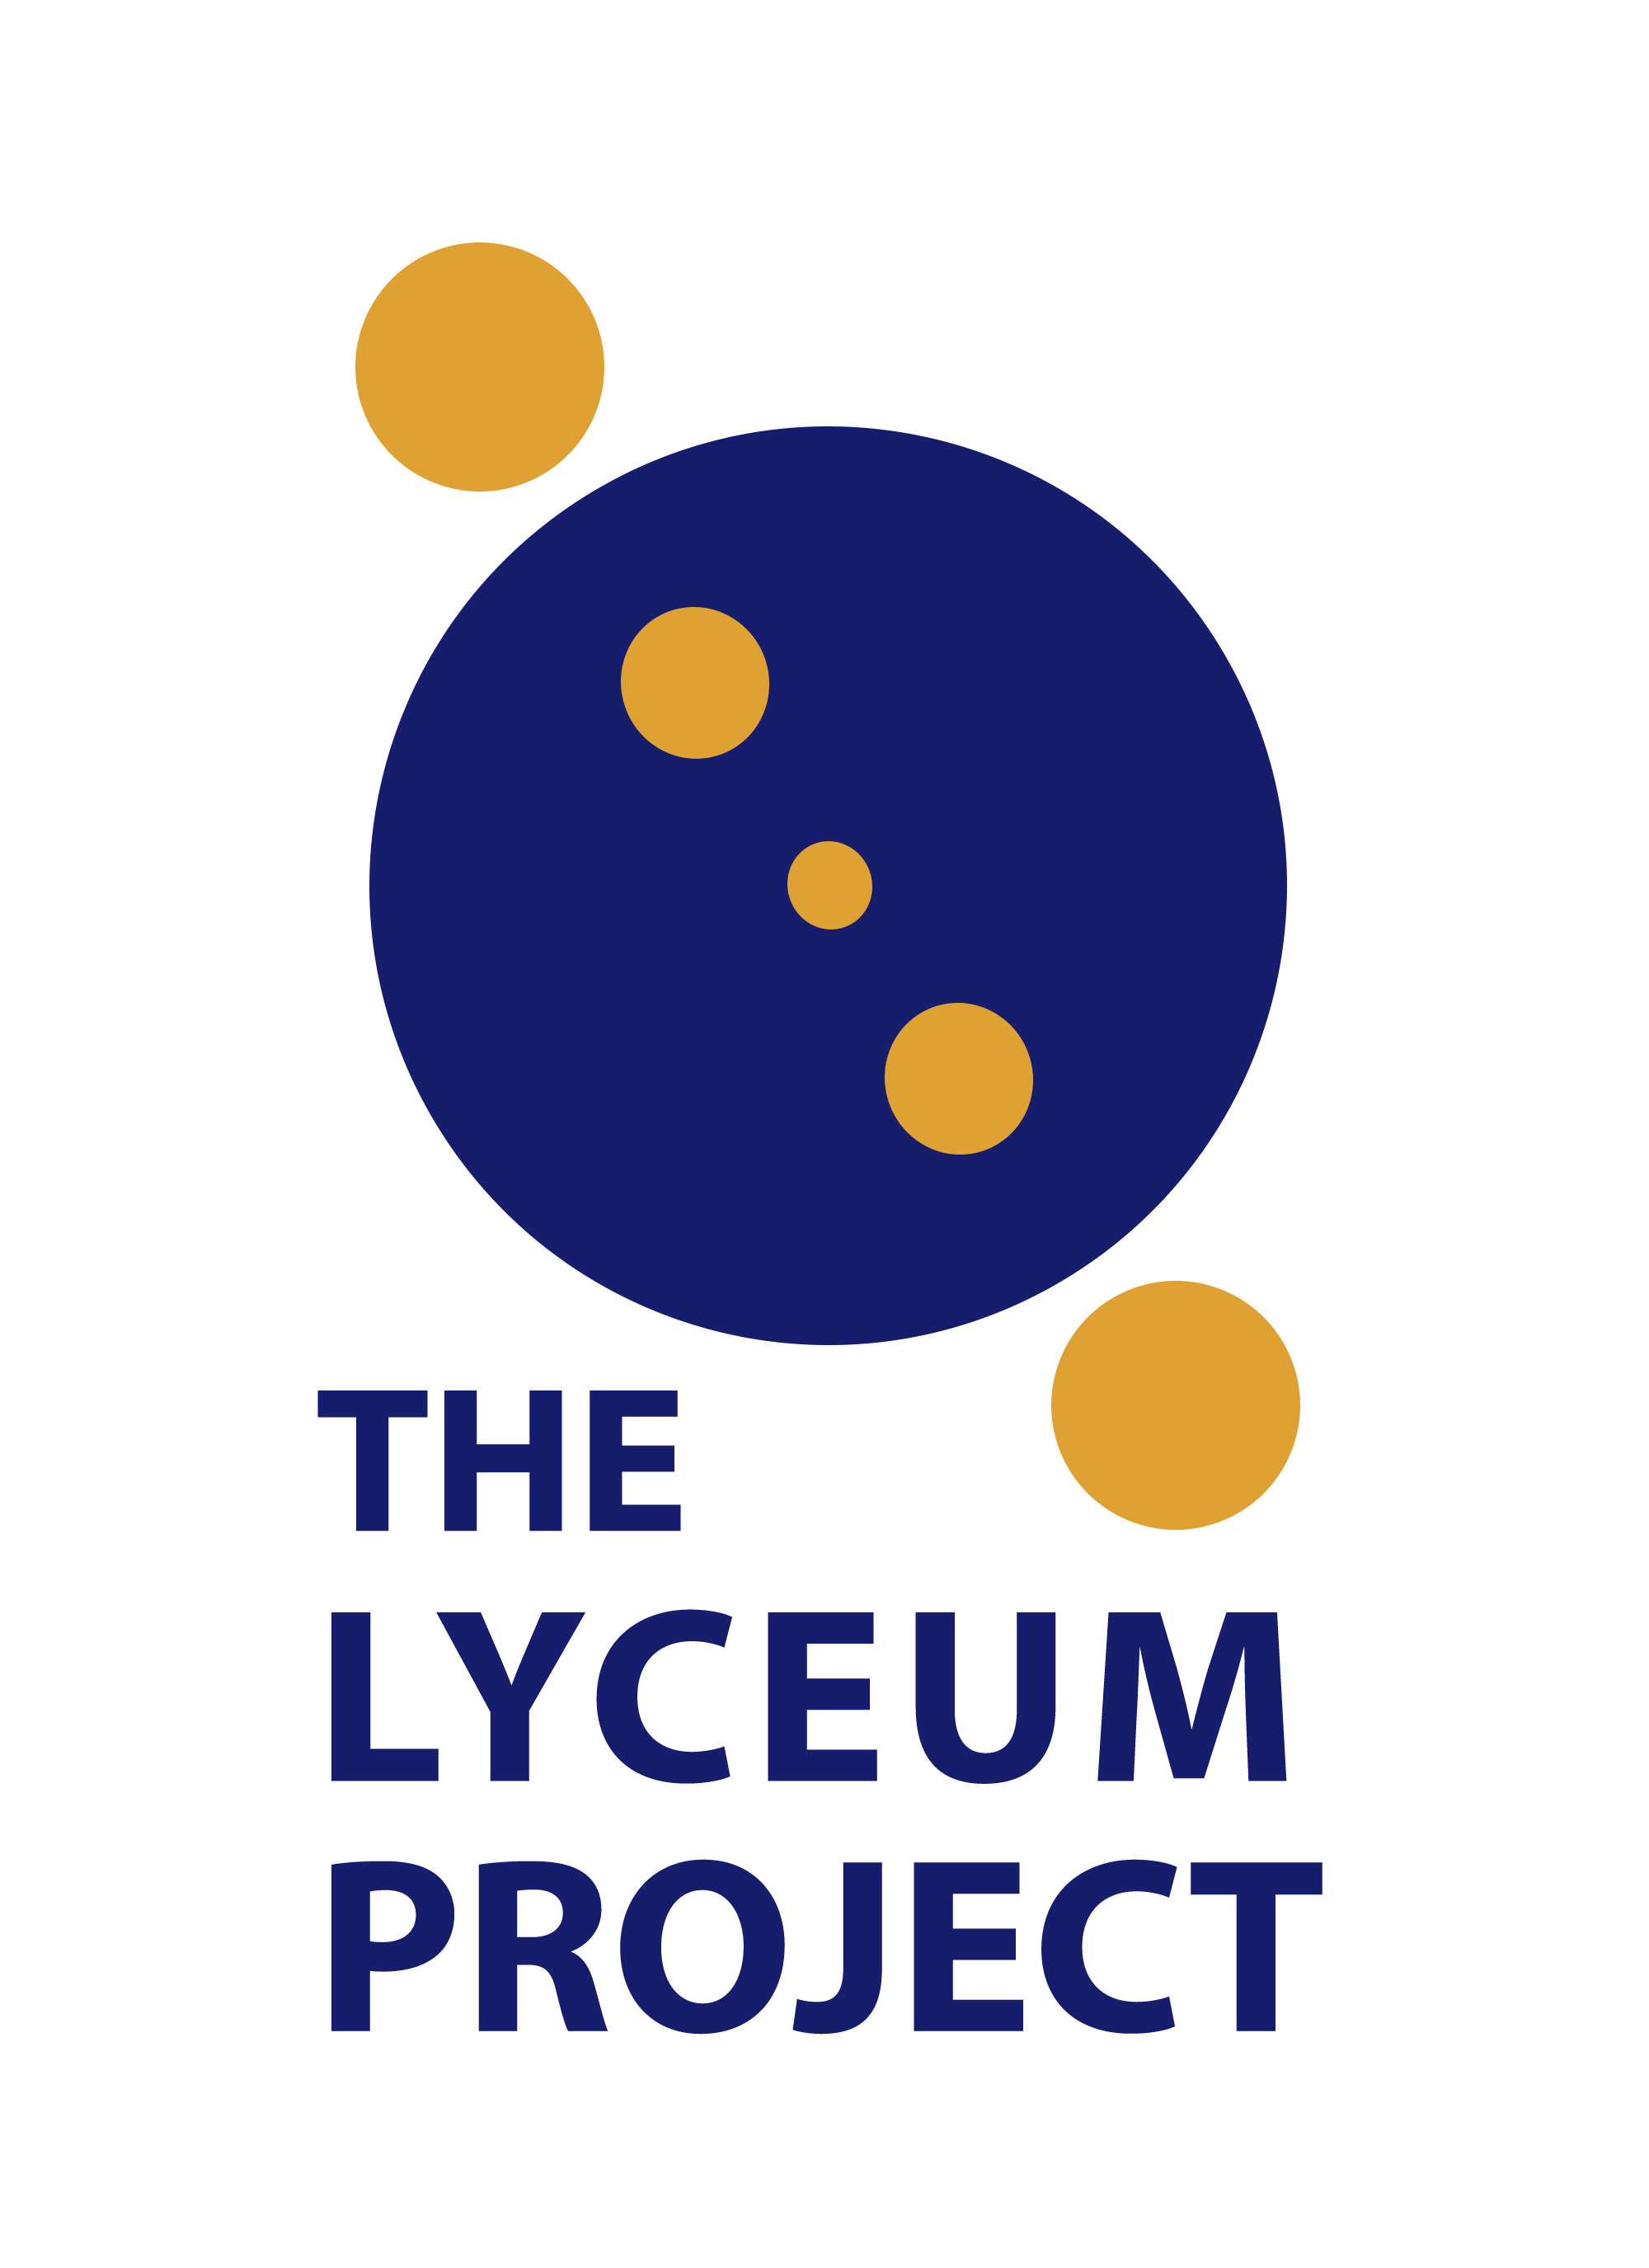 The Lyceum Project logo